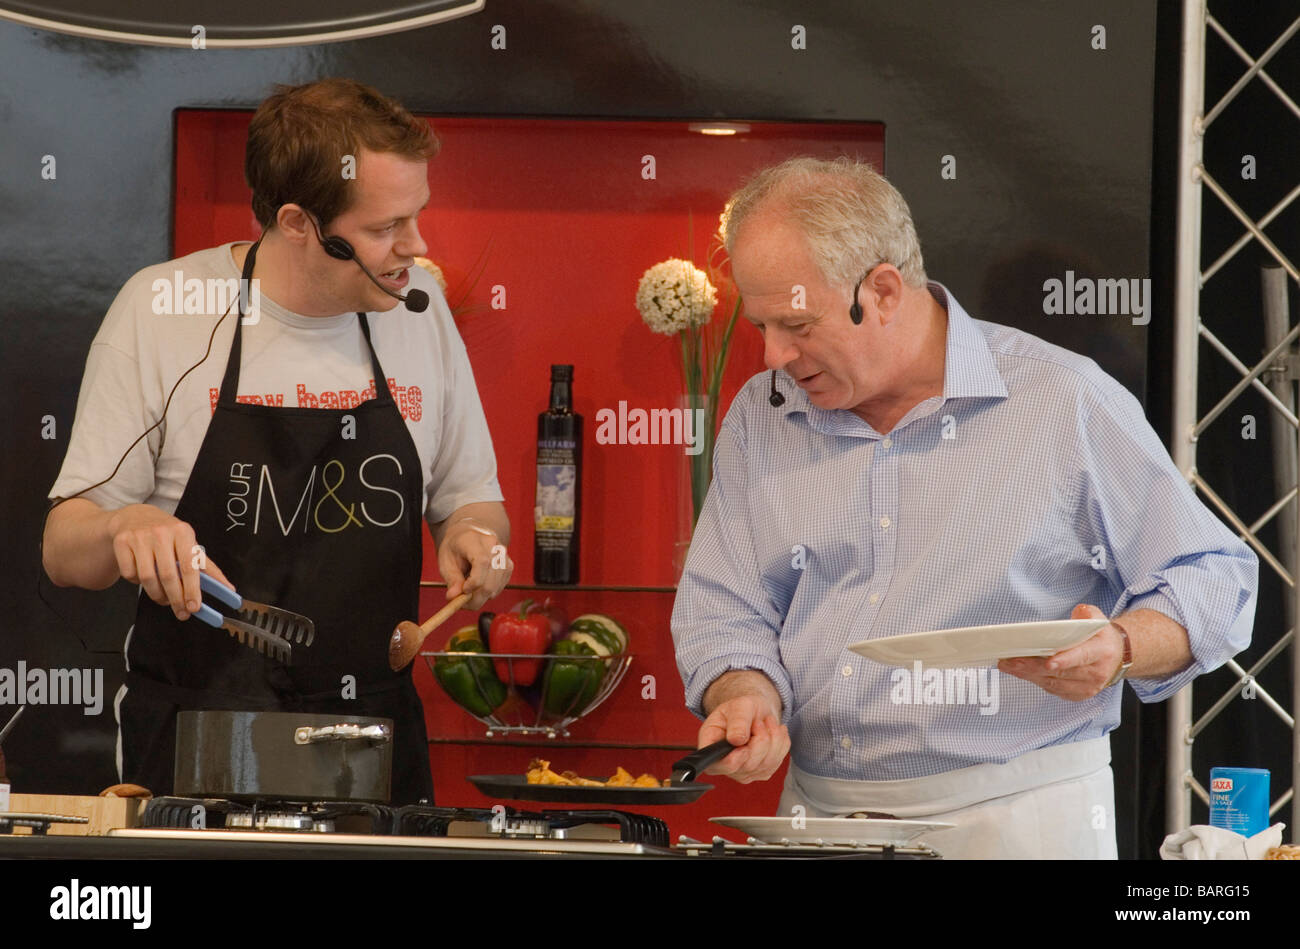 Tom Parker Bowles Matthew Fort cooking food demonstration    Aldeburgh Food Festival at Snape Maltings Suffolk England UK 2009 2000s HOMER SYKES Stock Photo